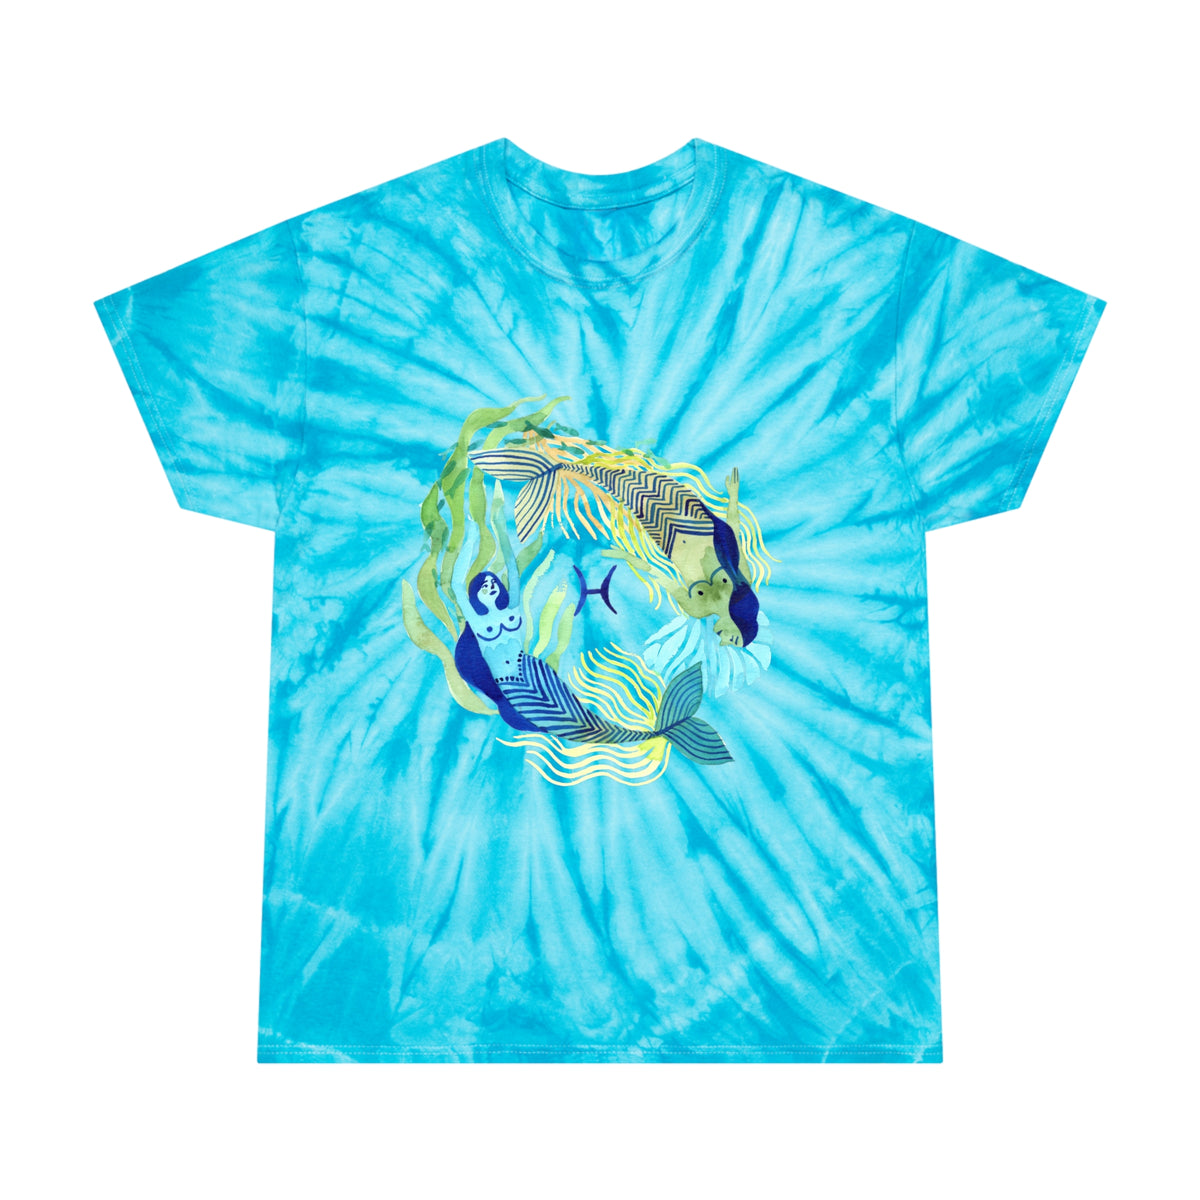 Pisces Perfection: The Fish Tie Dye Tee